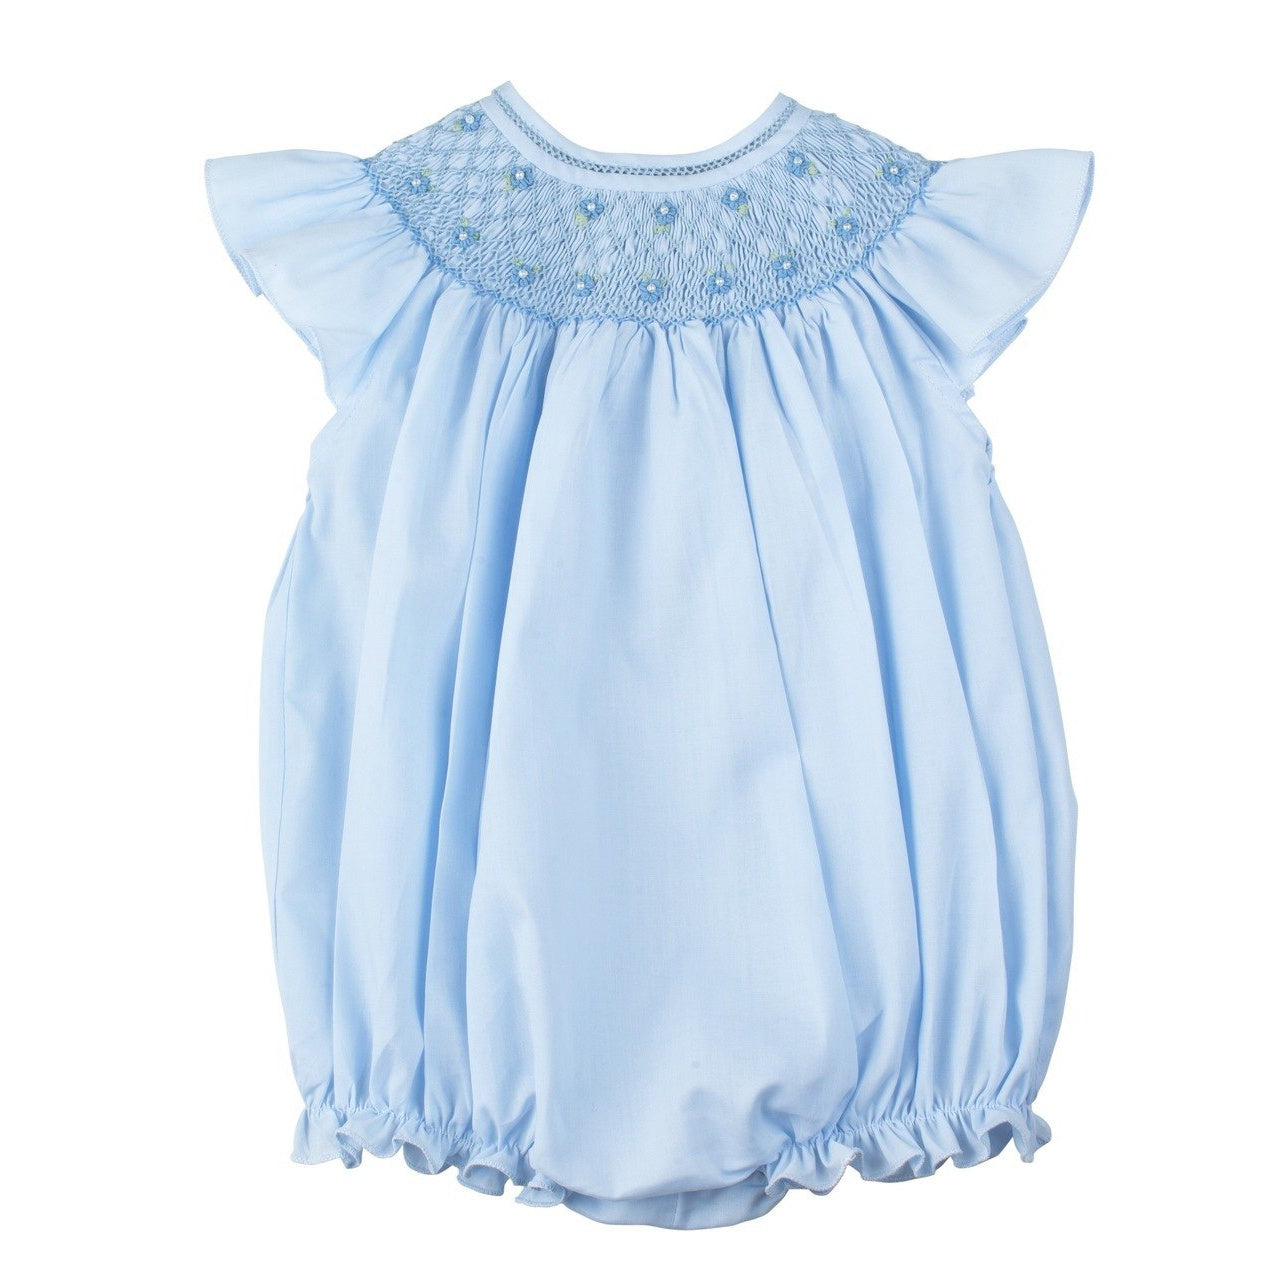 Feltman Brothers Blue Romper With Angel Sleeves Smocking and Pearls  785